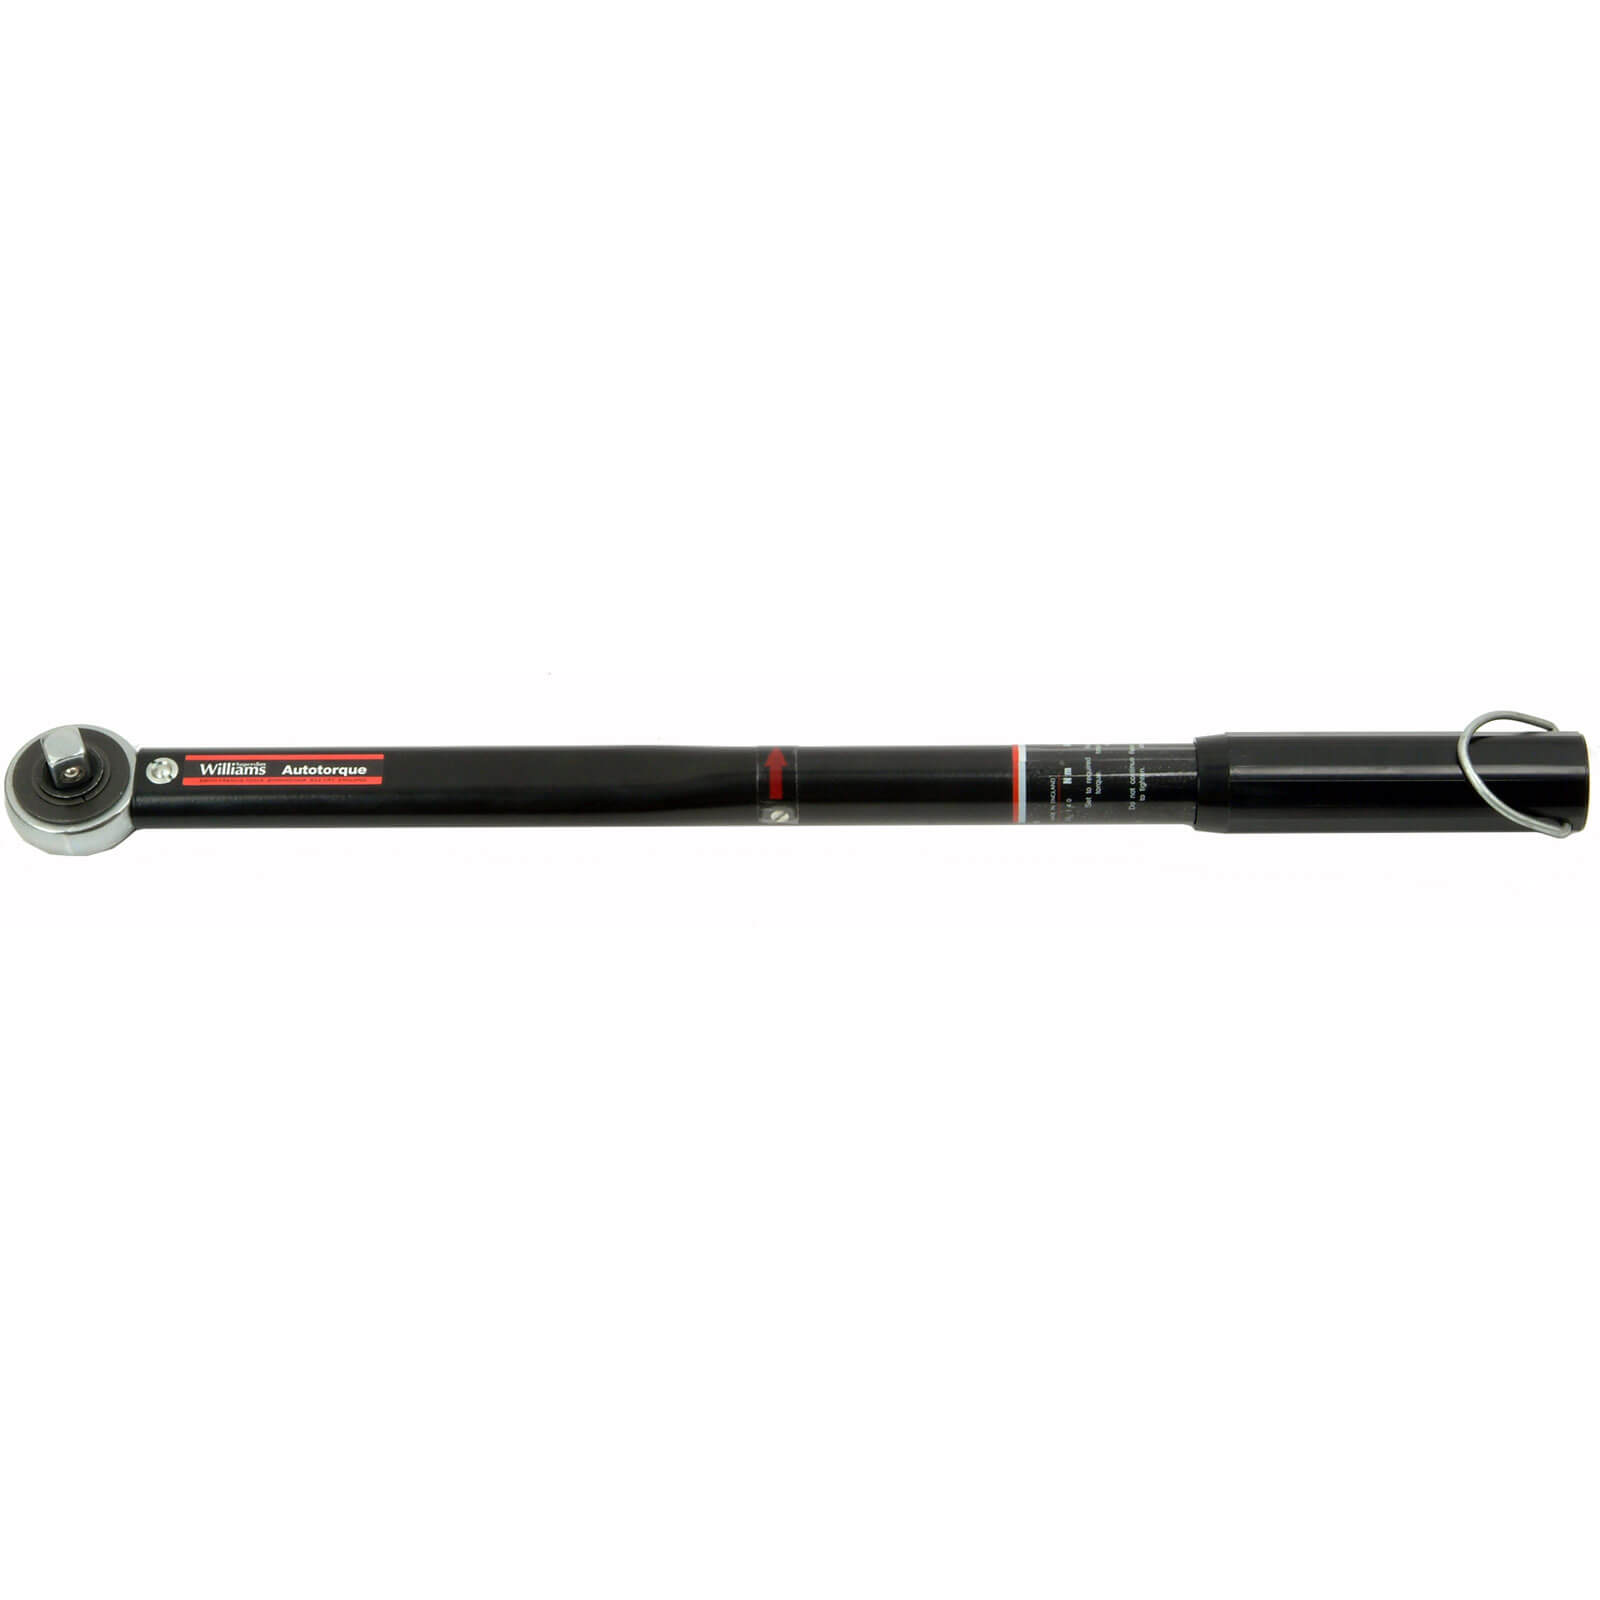 Image of Williams 1/2 Drive Torque Wrench 1/2" 30Nm - 140Nm